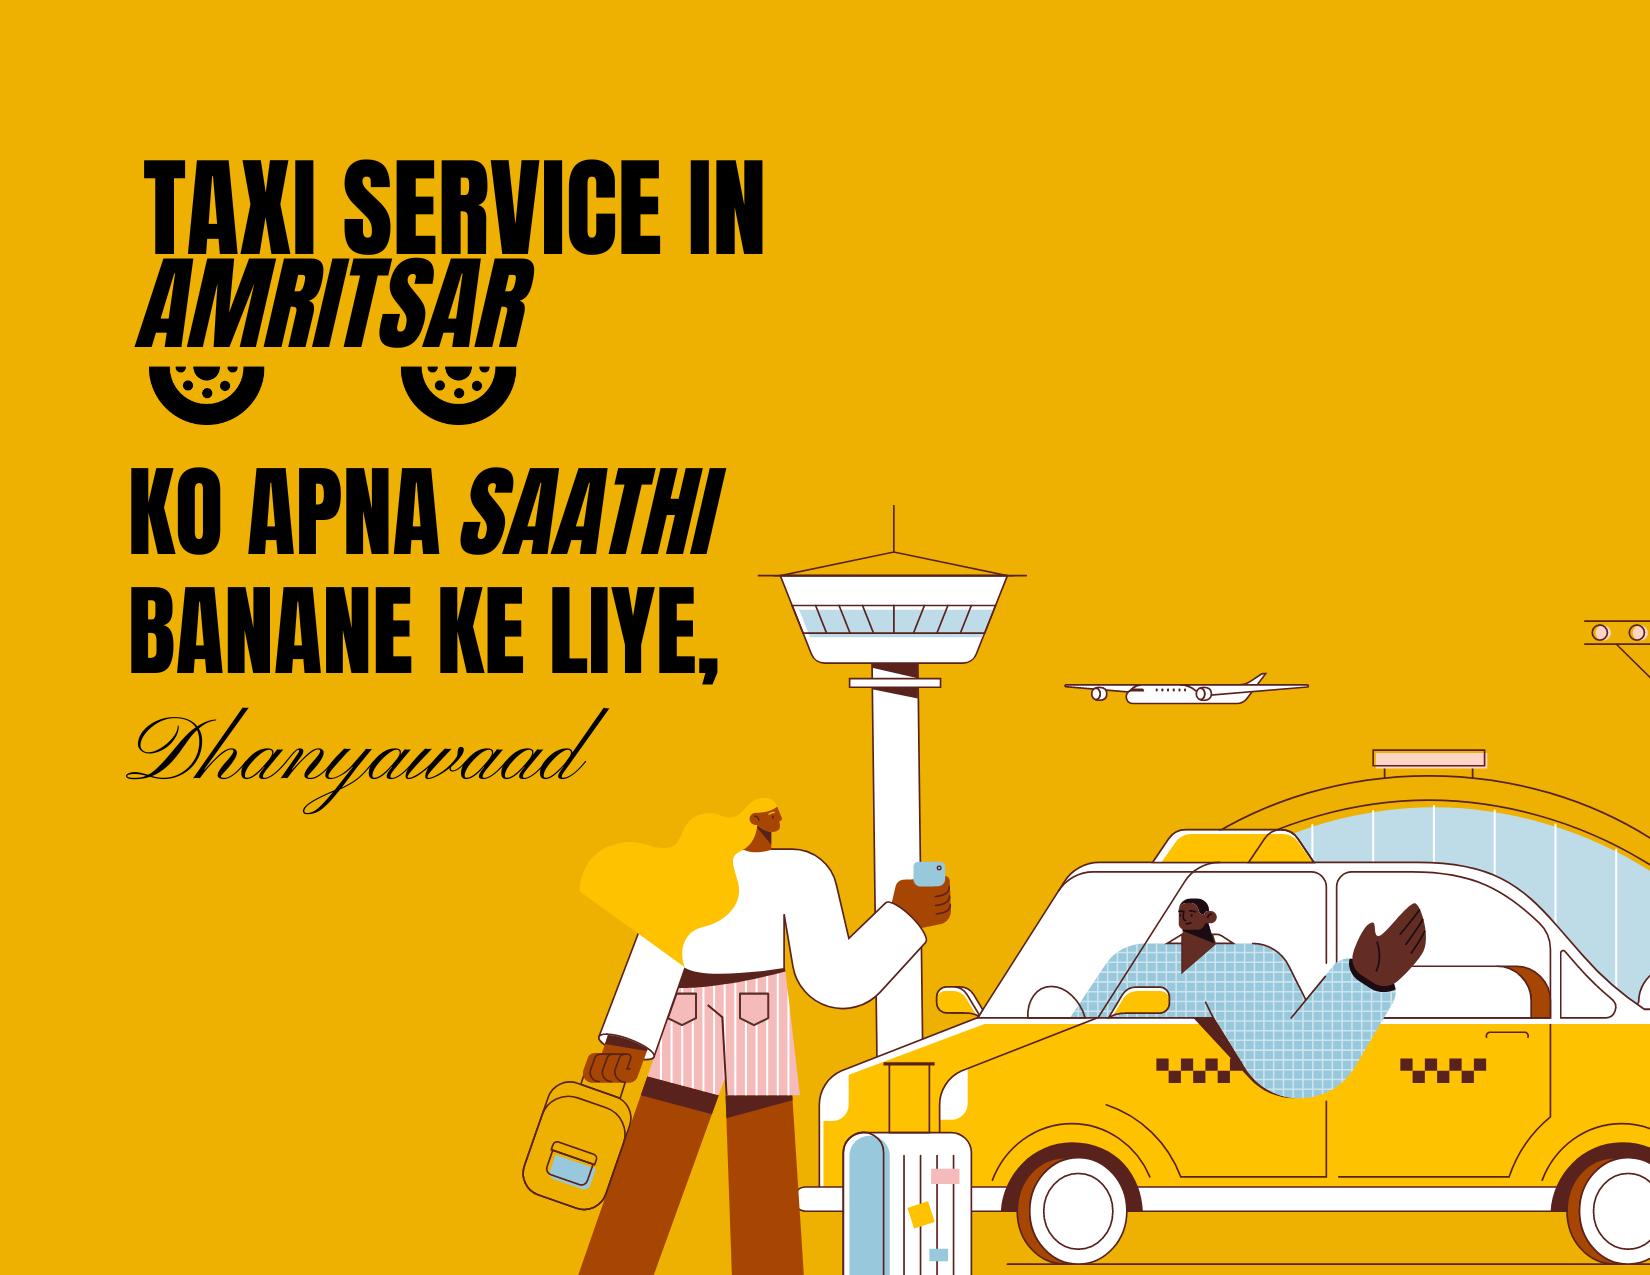 Taxi service in amritsar